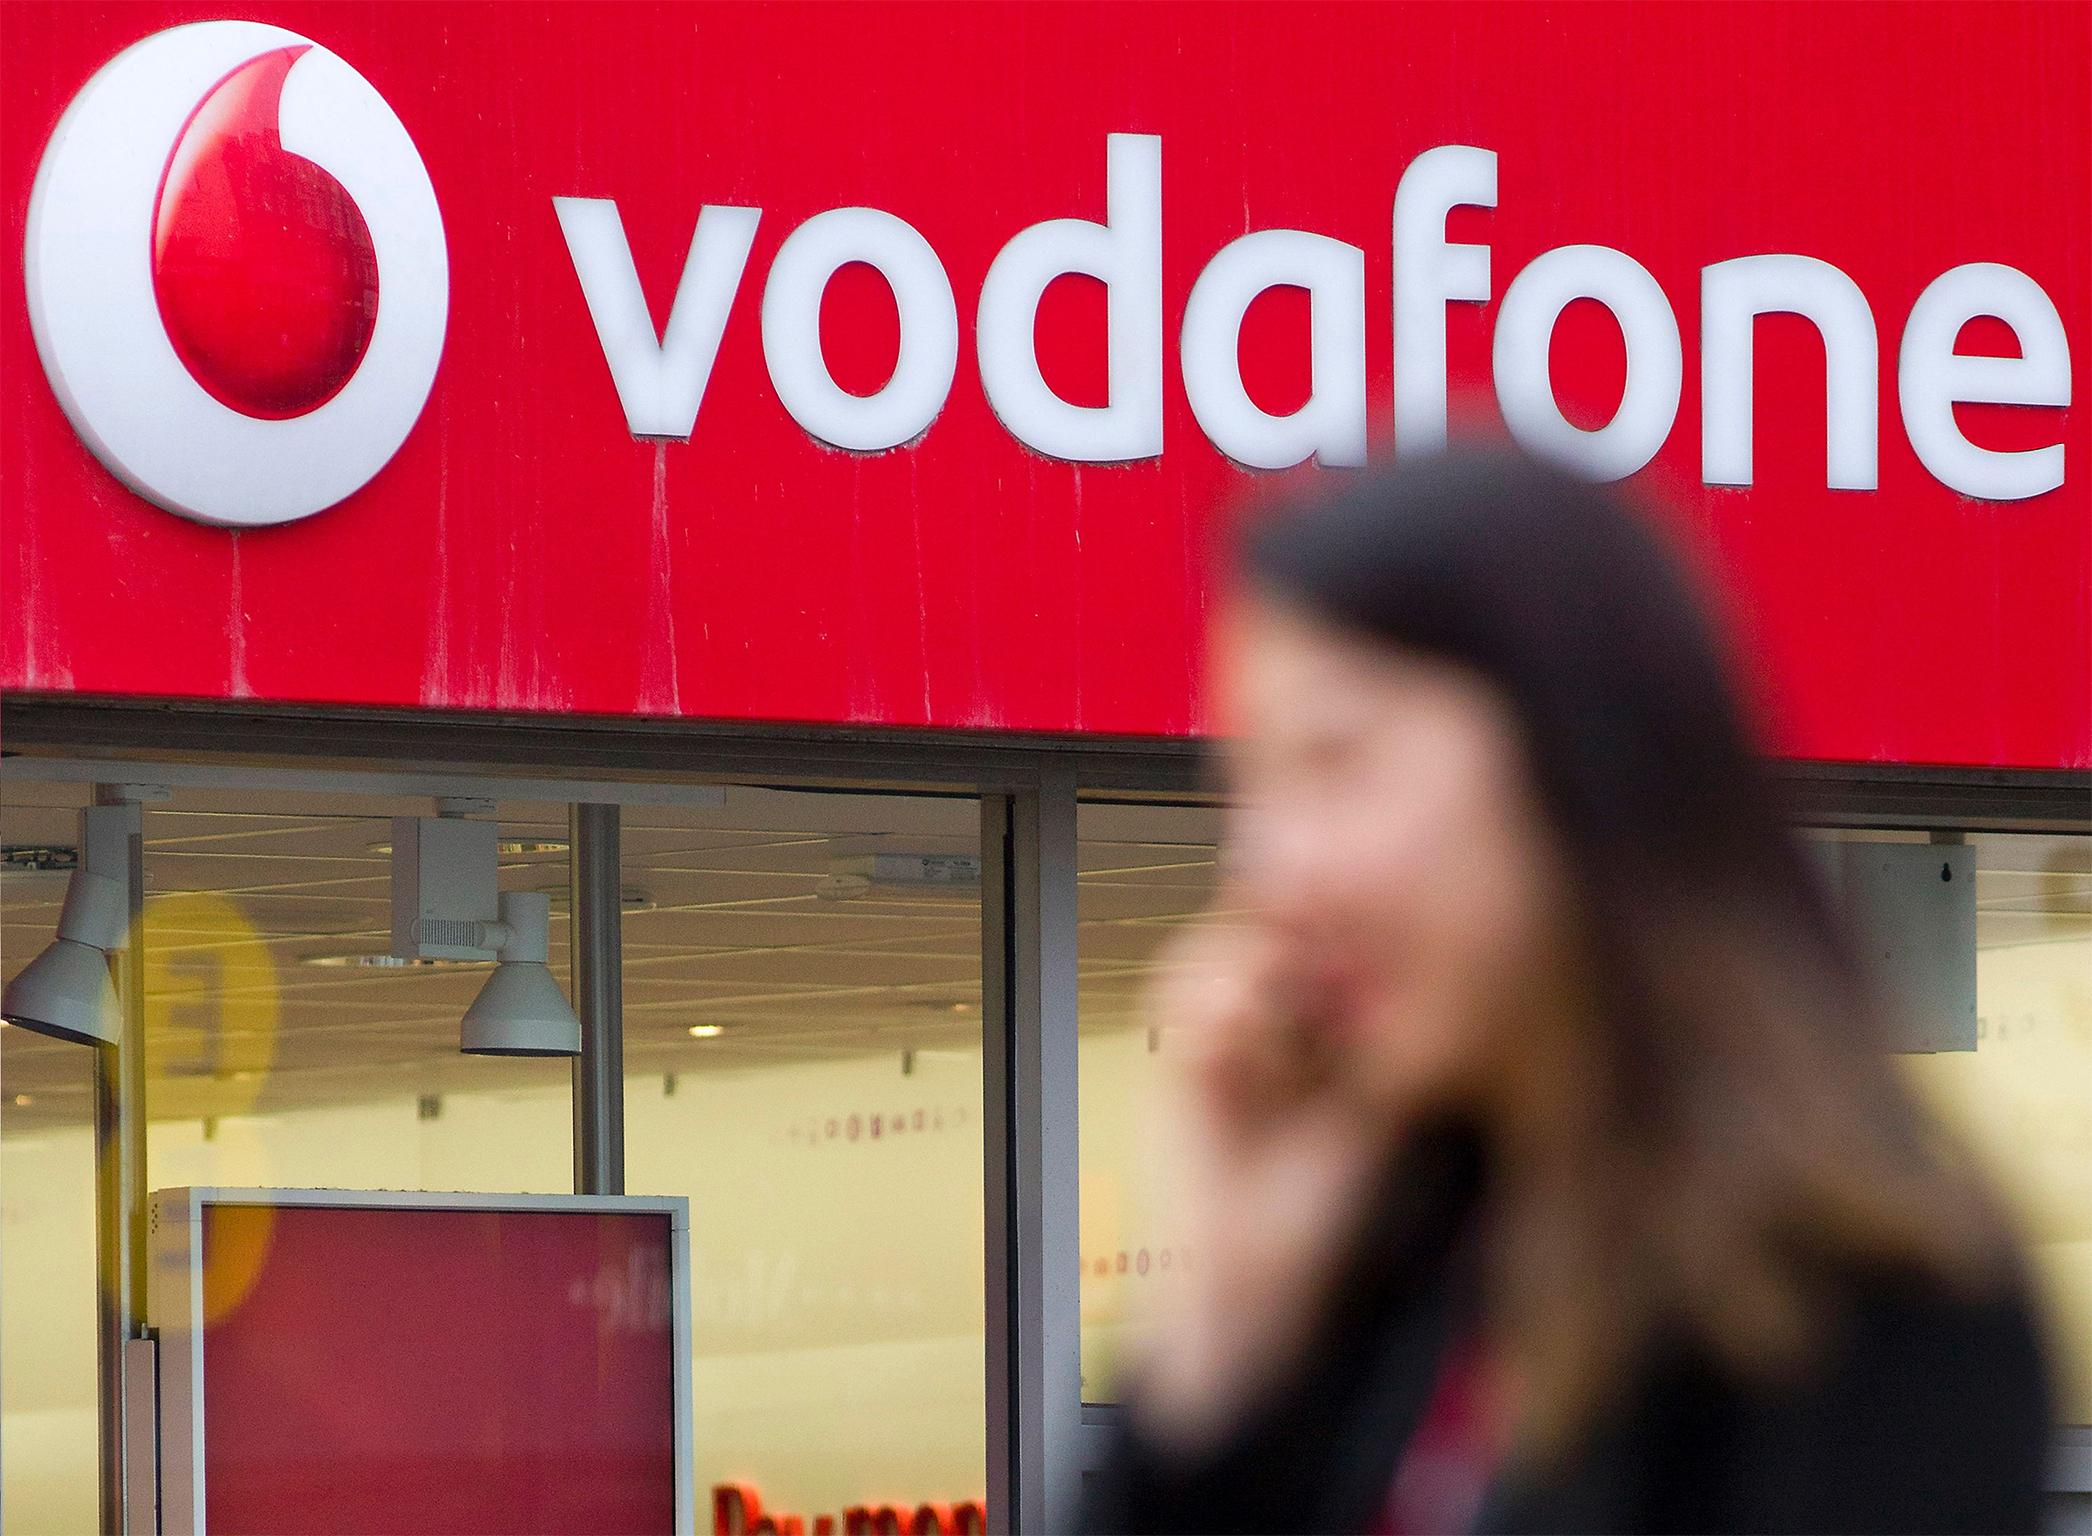 Vodafone has breached a number of industry rules